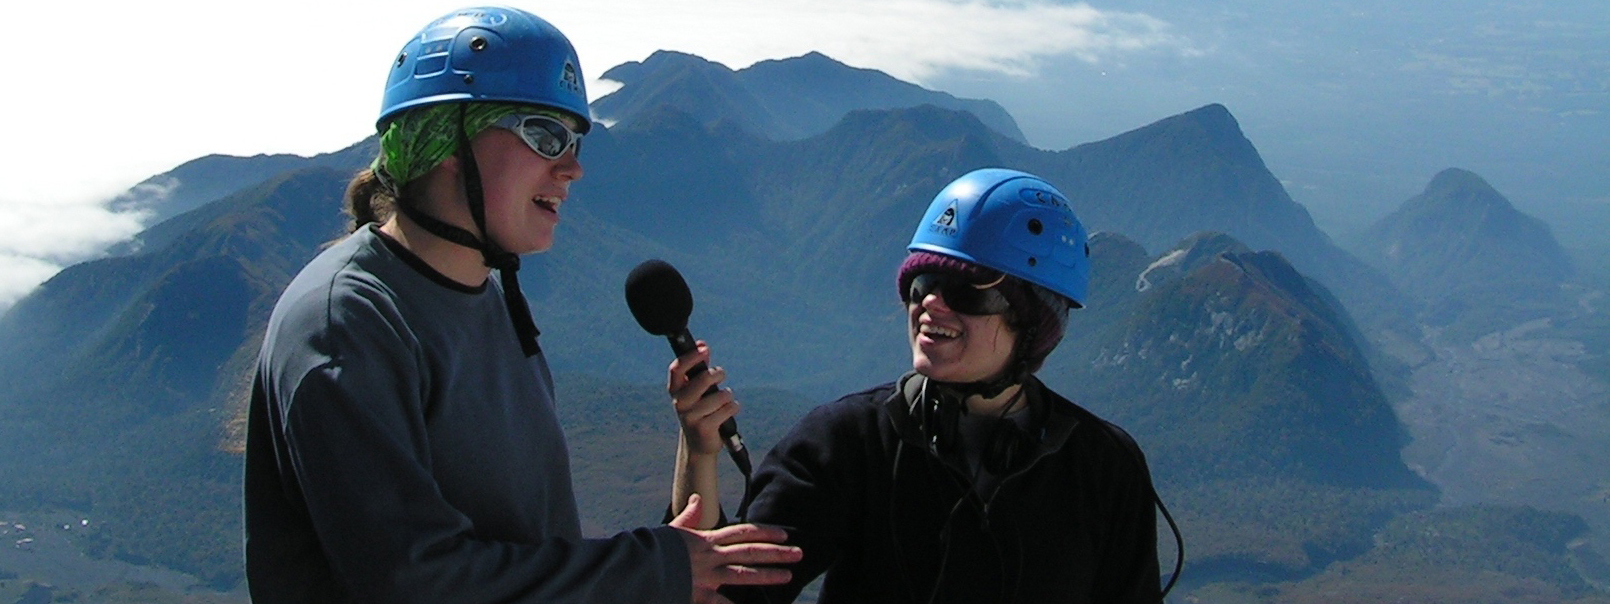 MIT Terrascope students interviewing on a mountaintop.